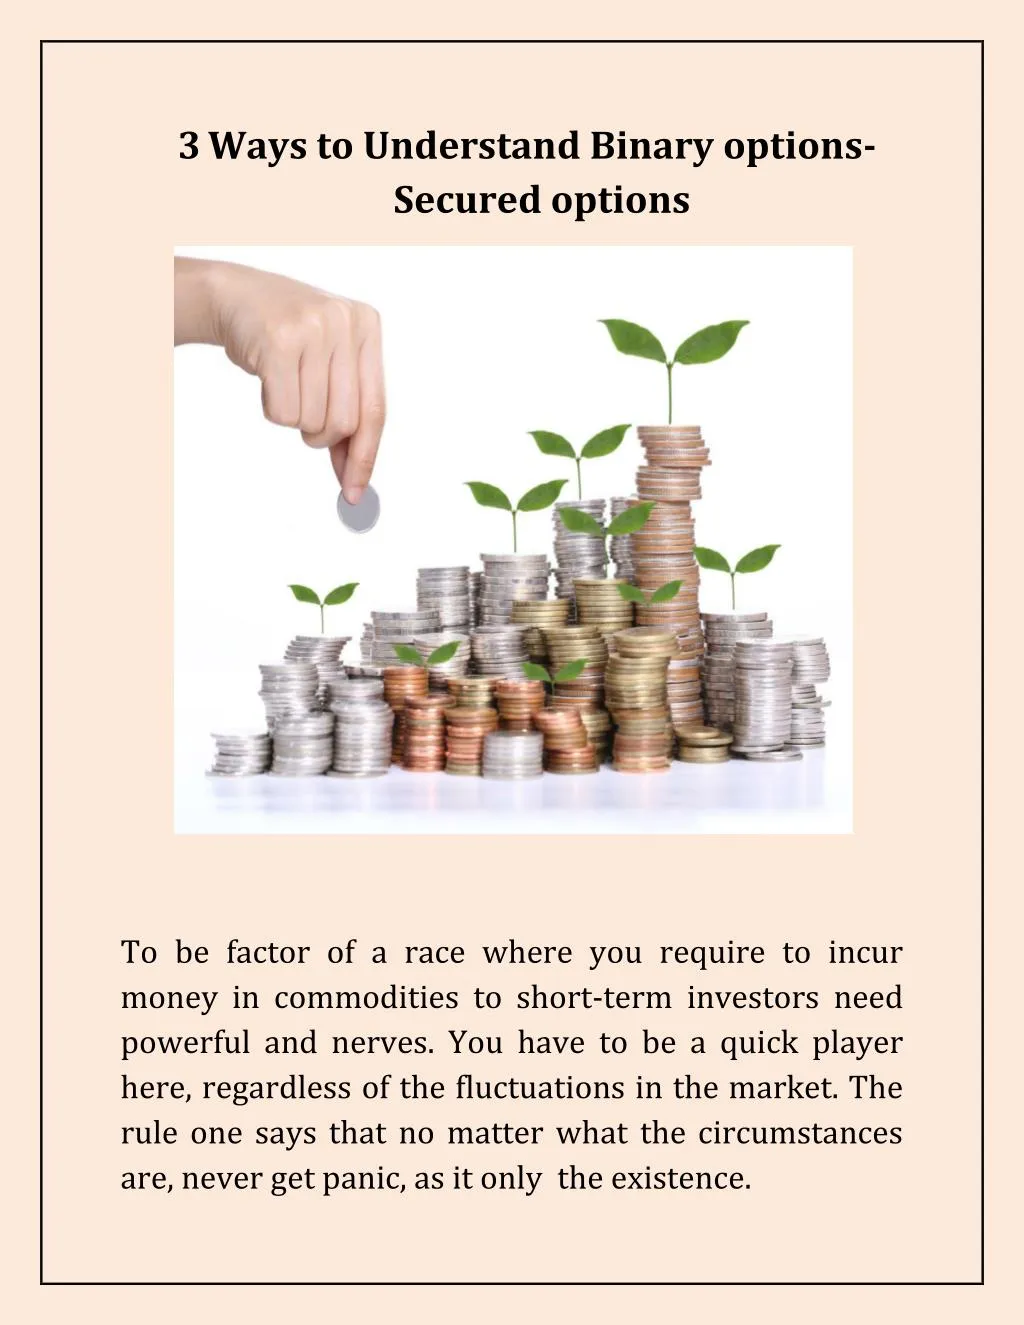 3 ways to understand binary options secured